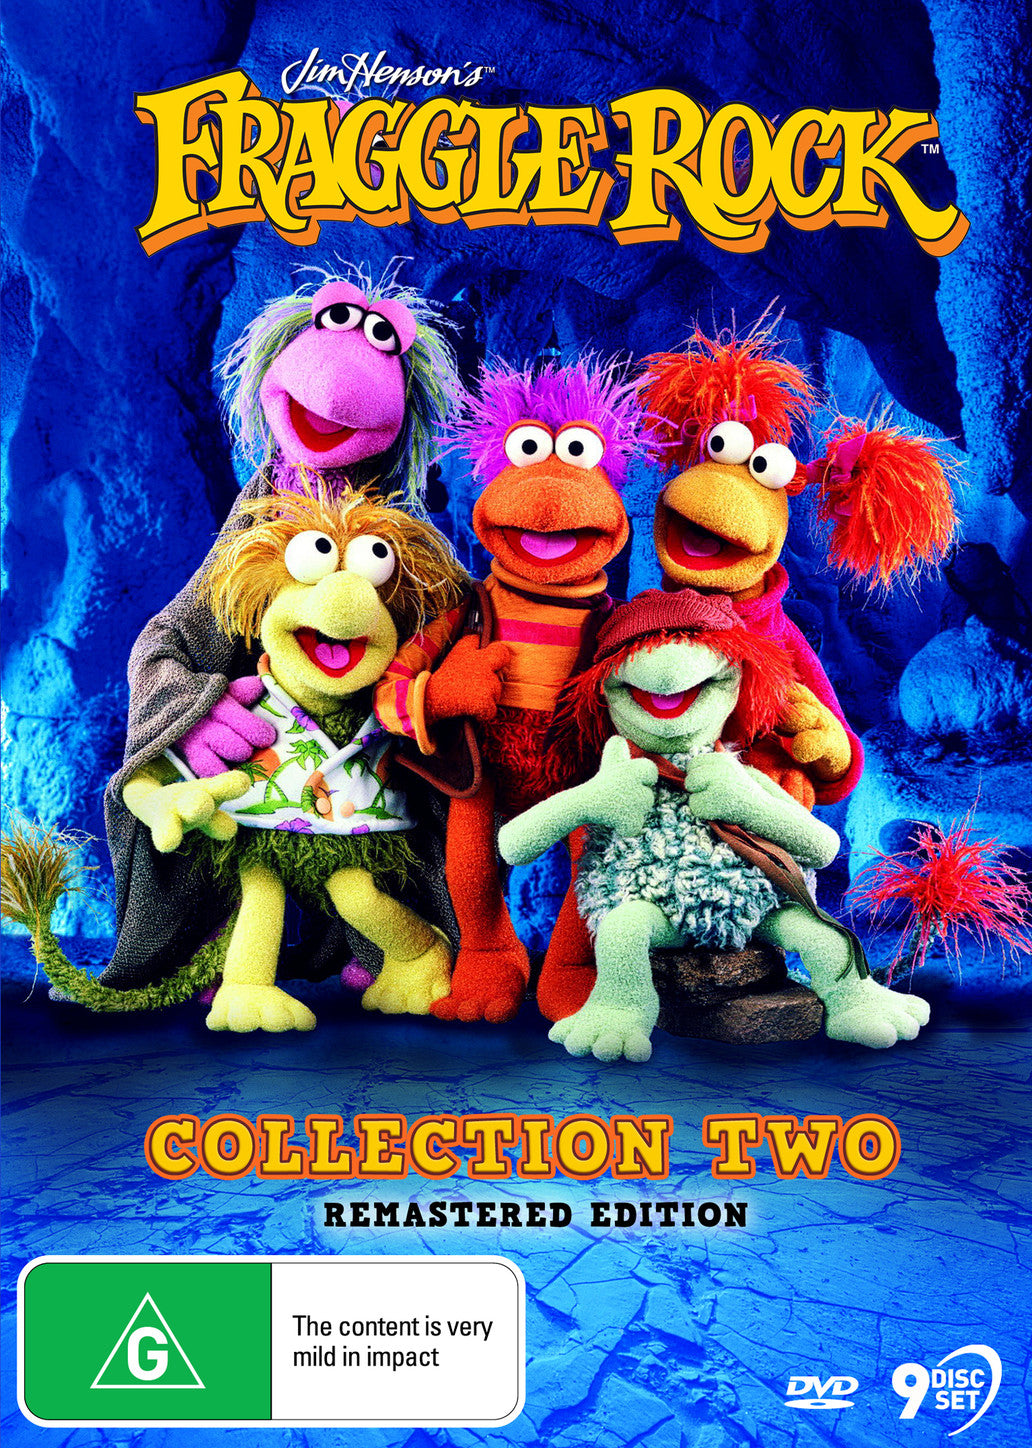 FRAGGLE ROCK - COLLECTION 2 (REMASTERED EDITION)